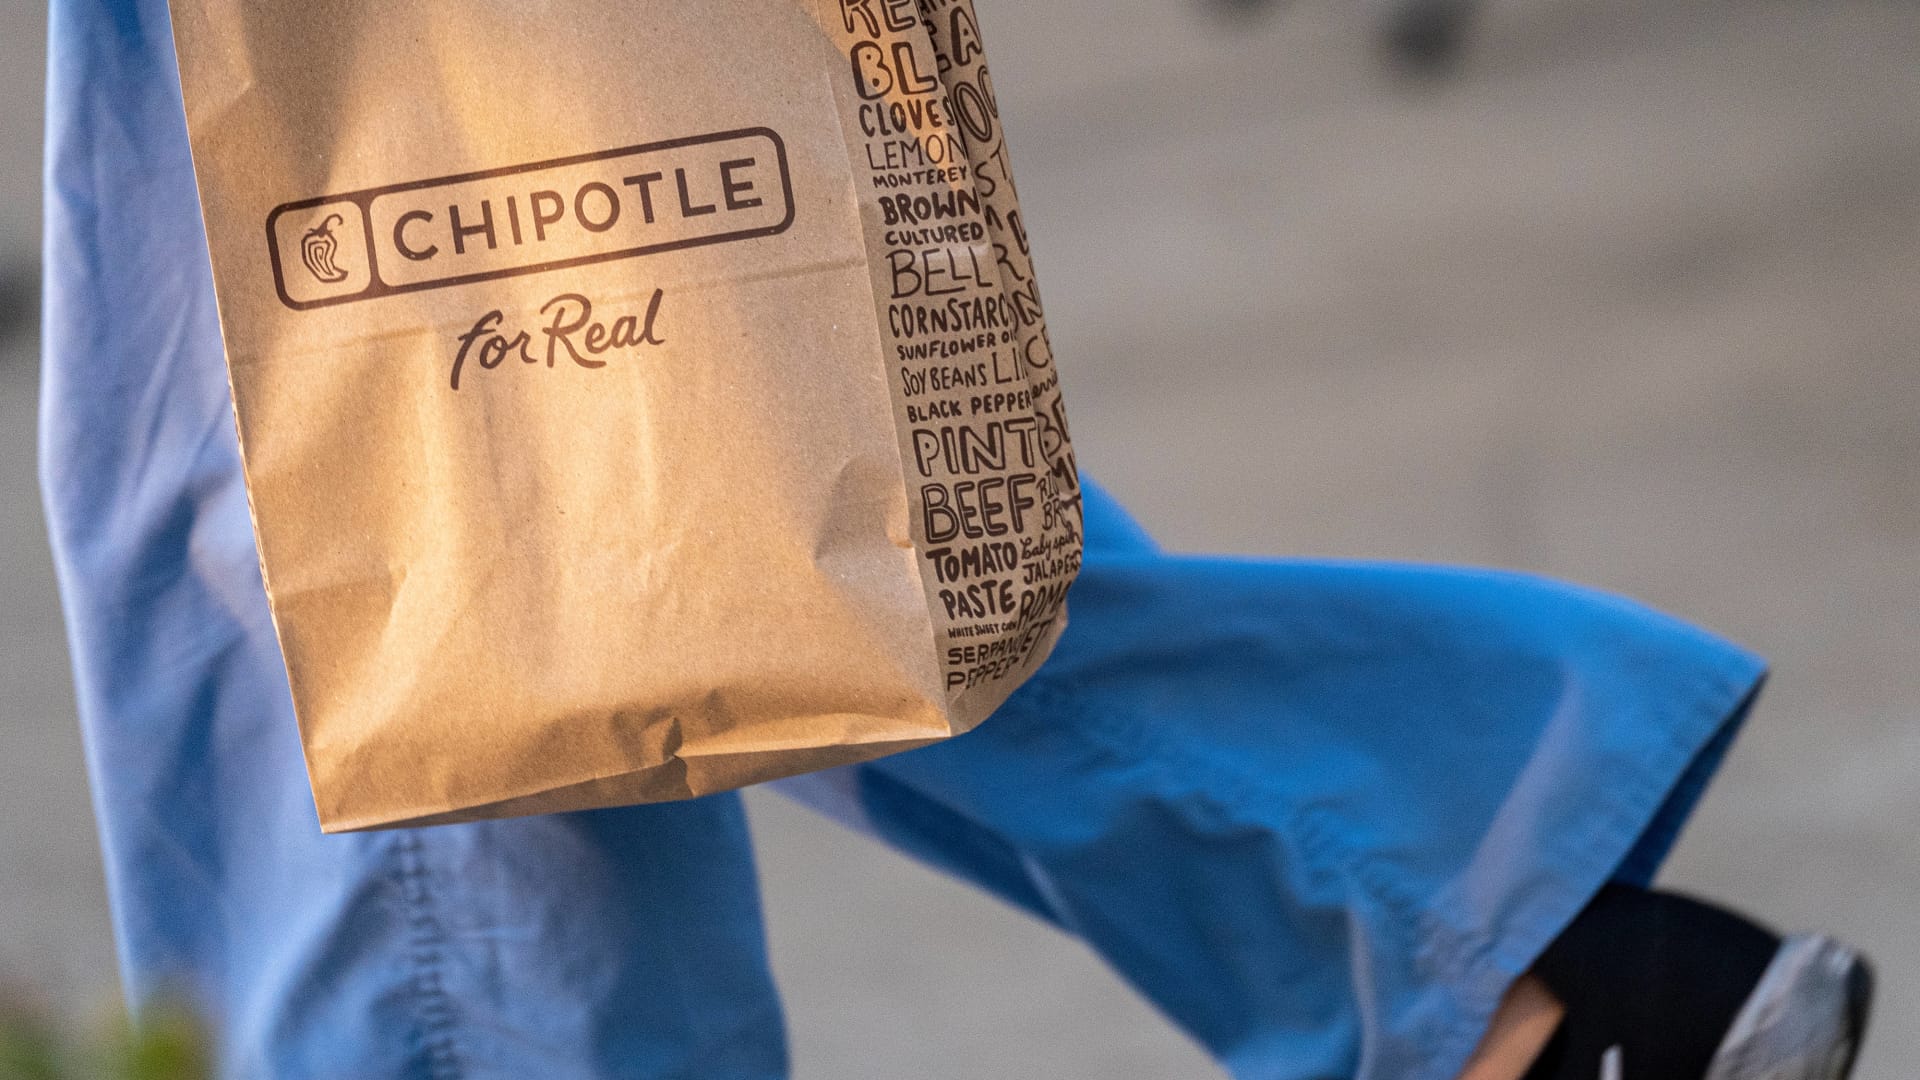 Chipotle restaurant in Maine becomes chain’s first to file for union election